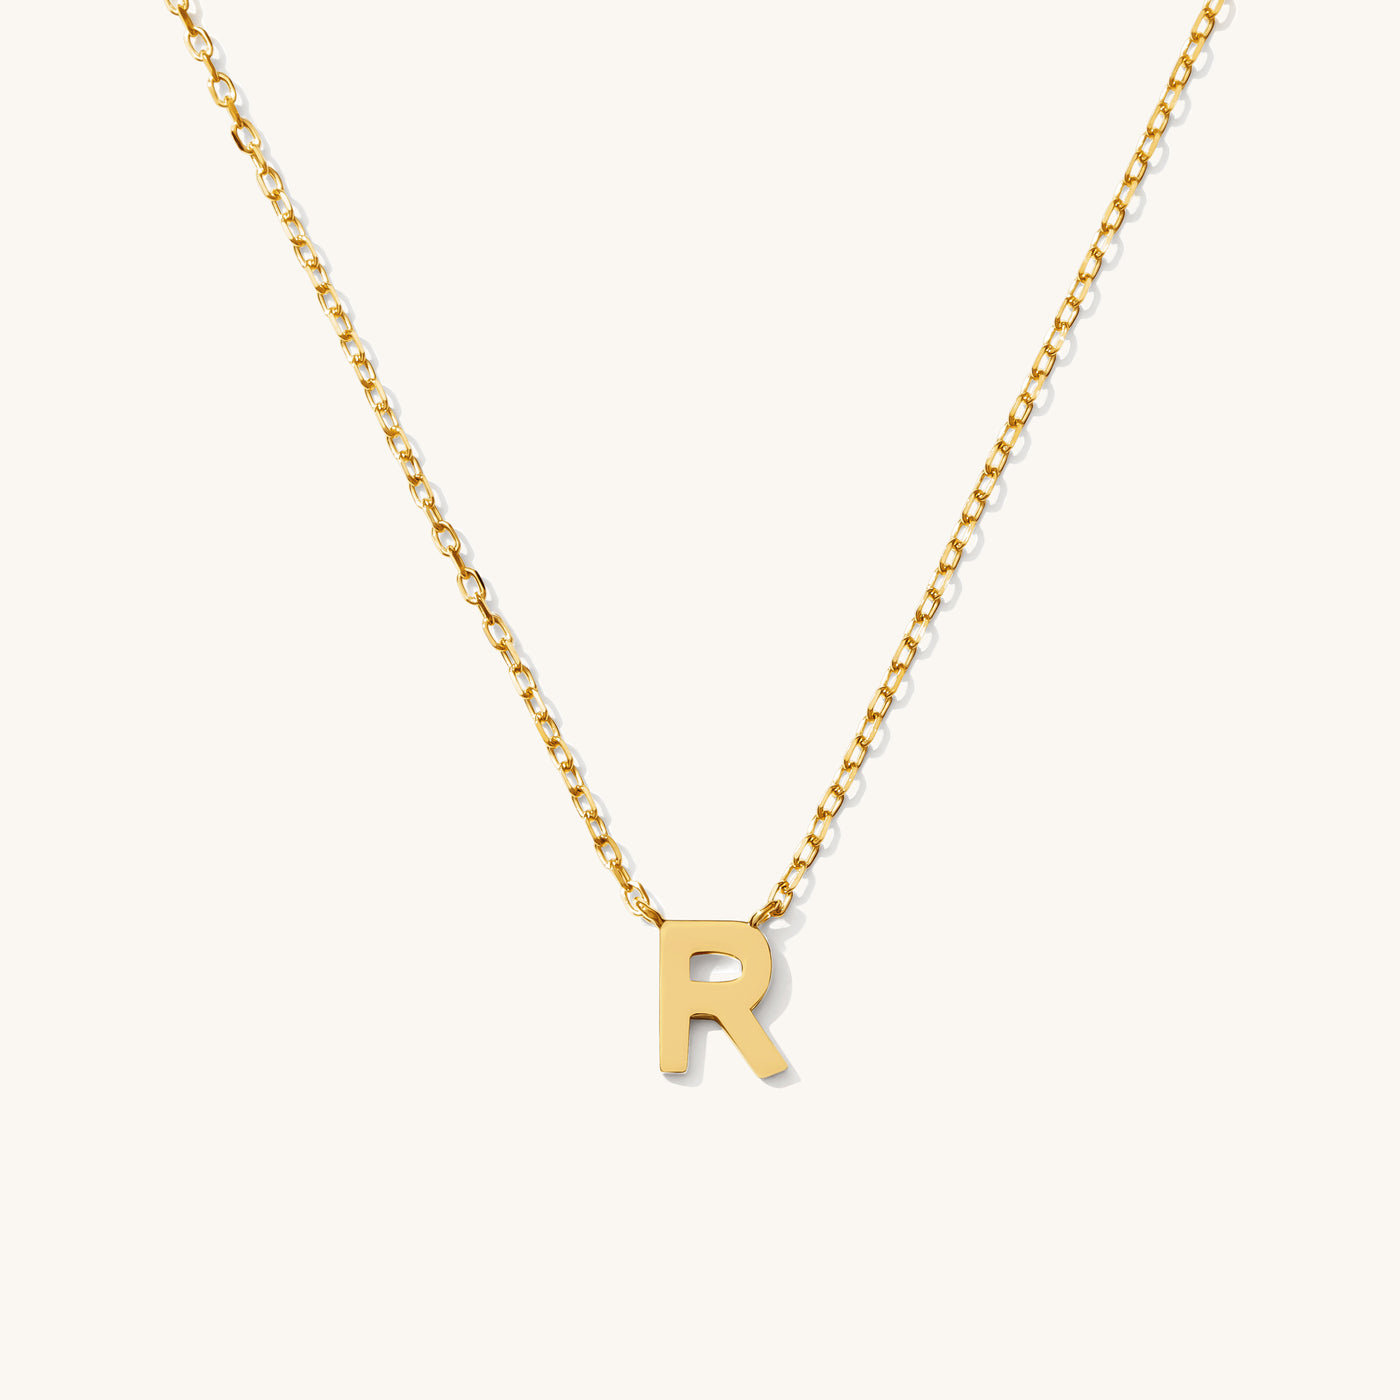 R Tiny Initial Necklace - 14k Solid Gold